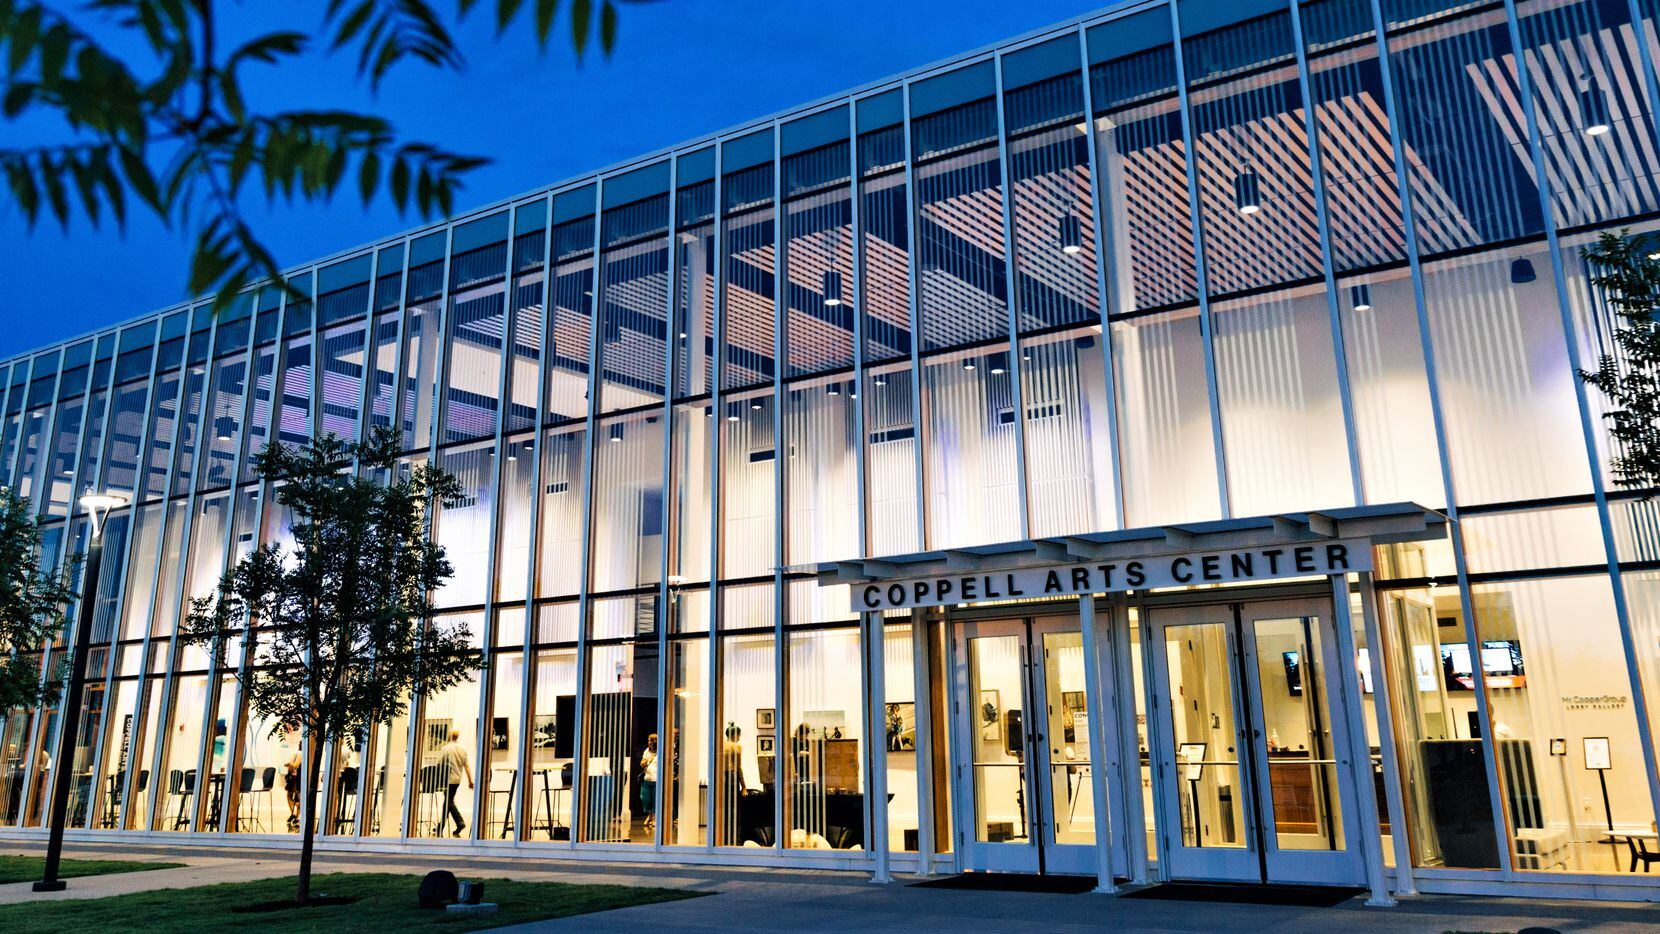 The Coppell Arts Center was designed by Kirk Johnson, director of sustainable design with the firm Corgan. Johnson also designed Moody Performance Hall.